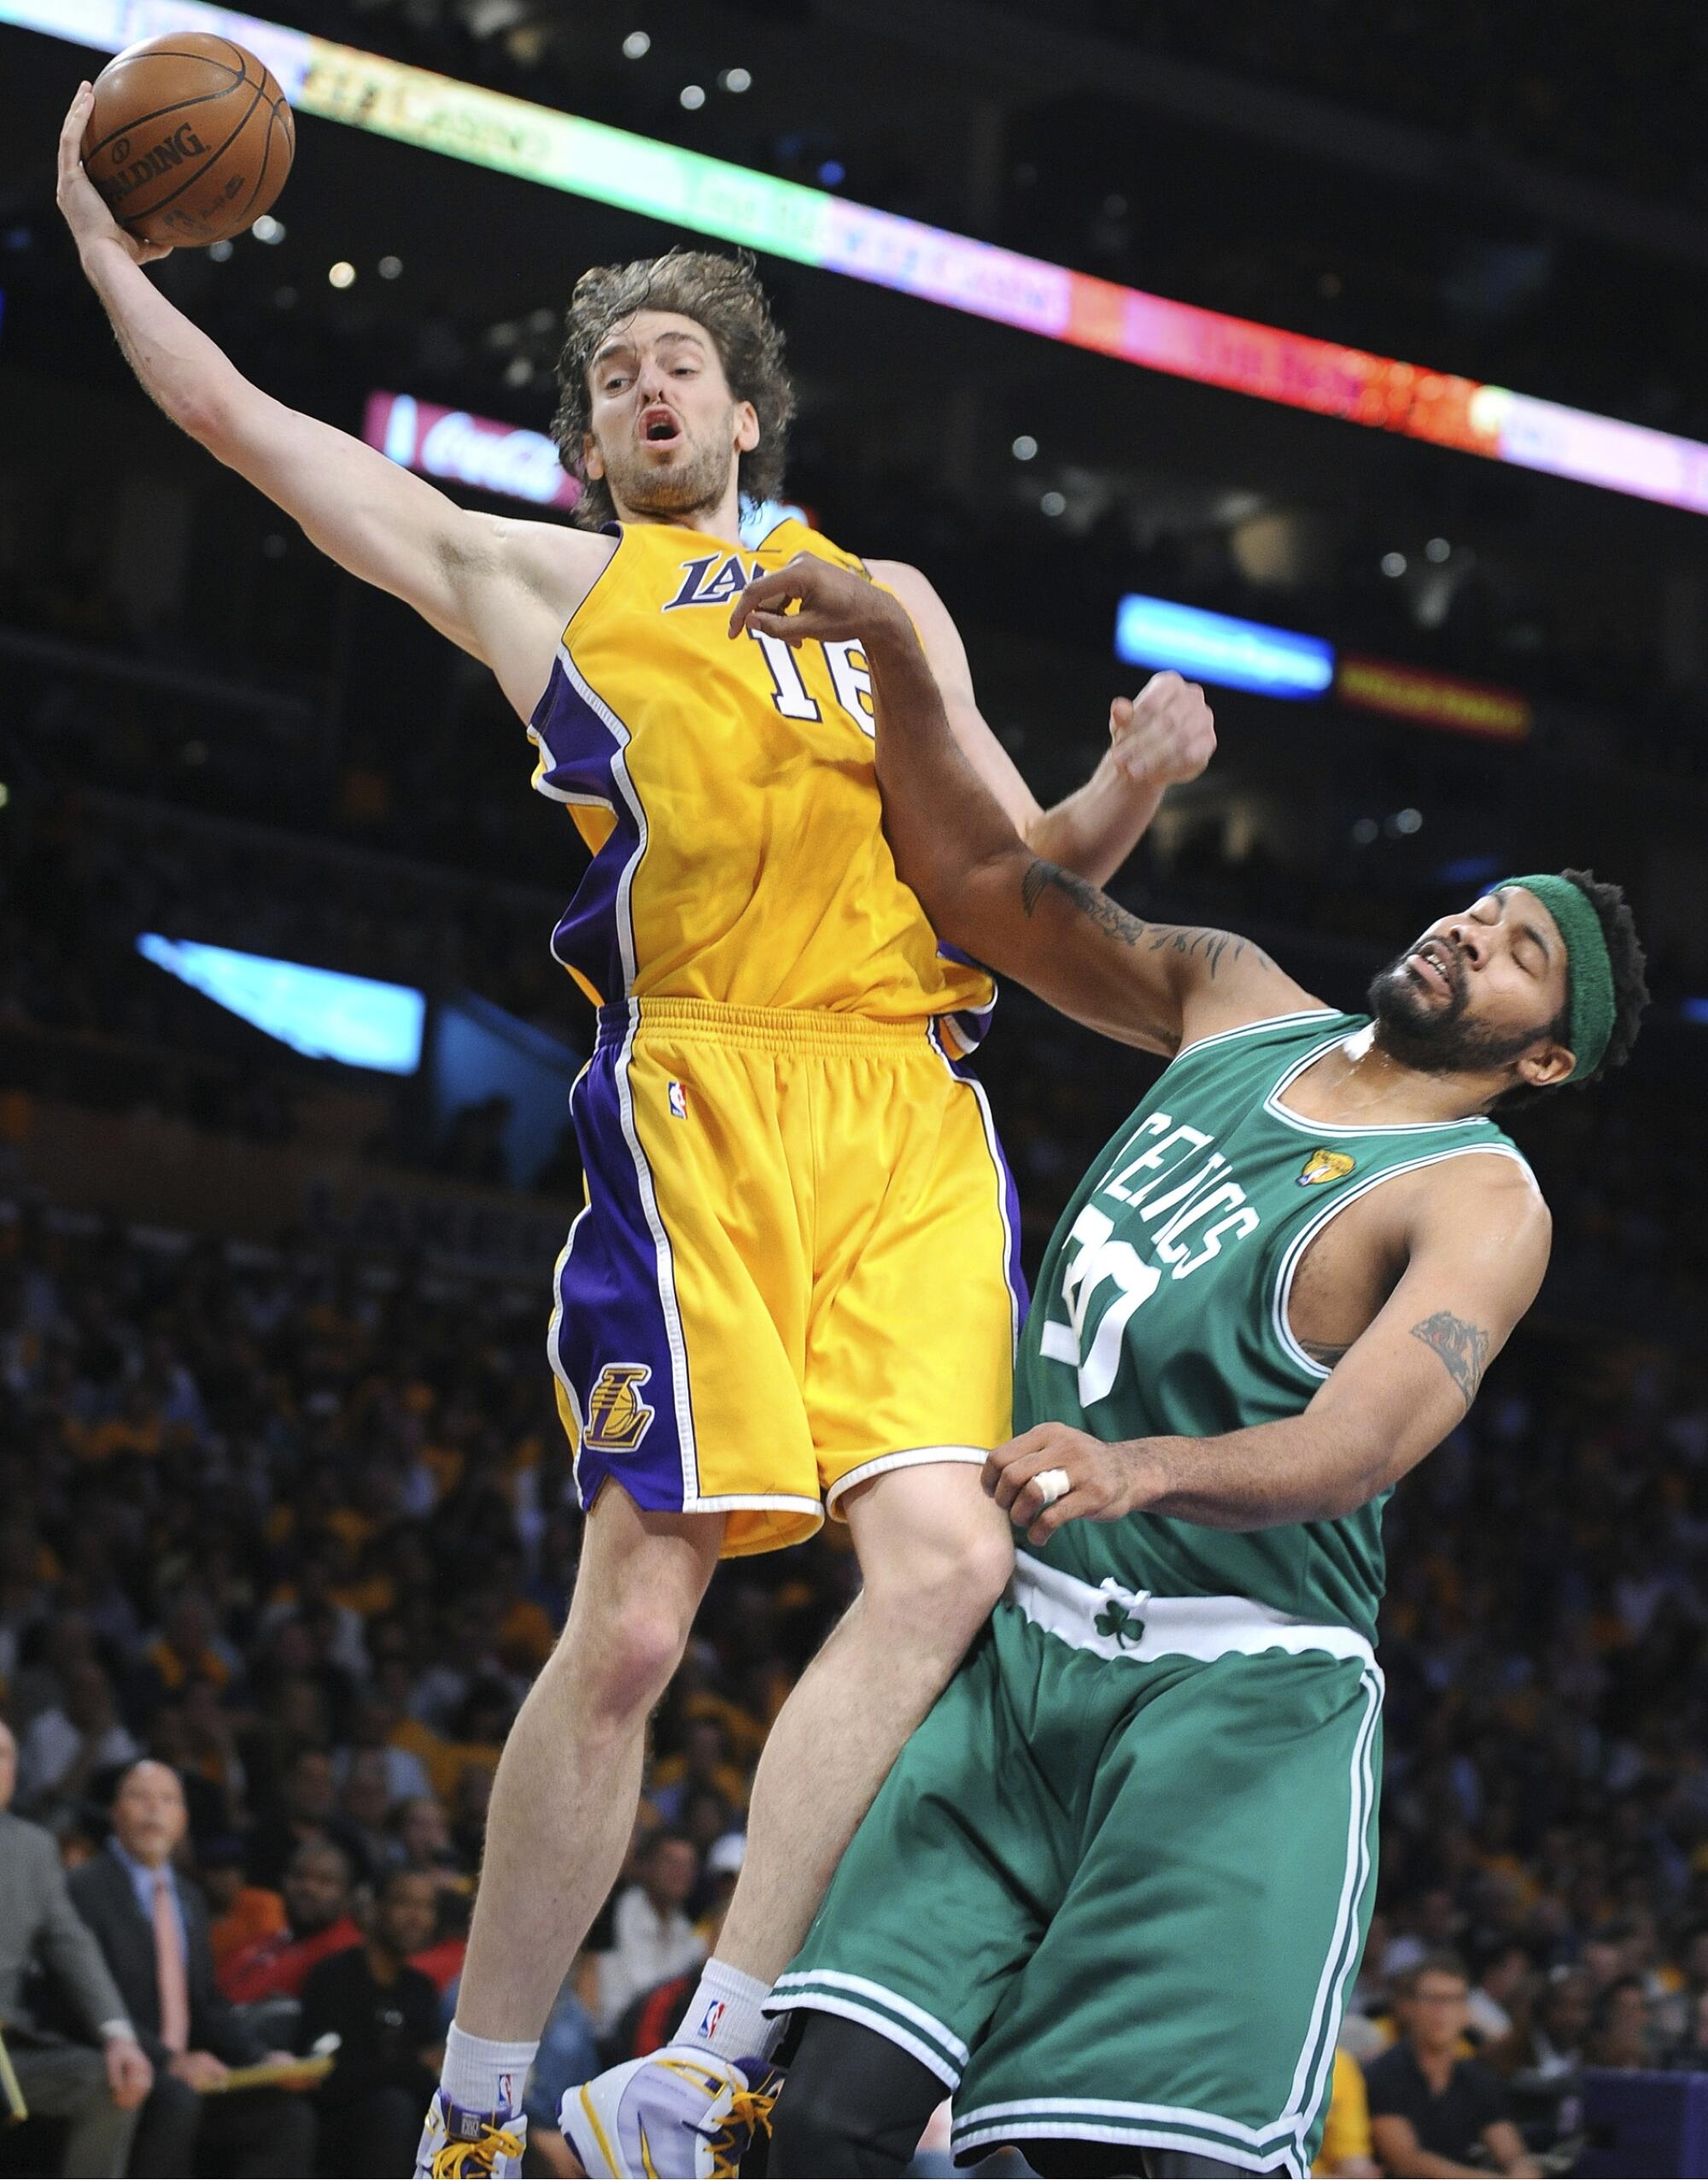 Lakers forward Pau Gasol hauls in a pass above Celtics forward Rasheed Wallace during Game 1 of the 2010 NBA Finals.